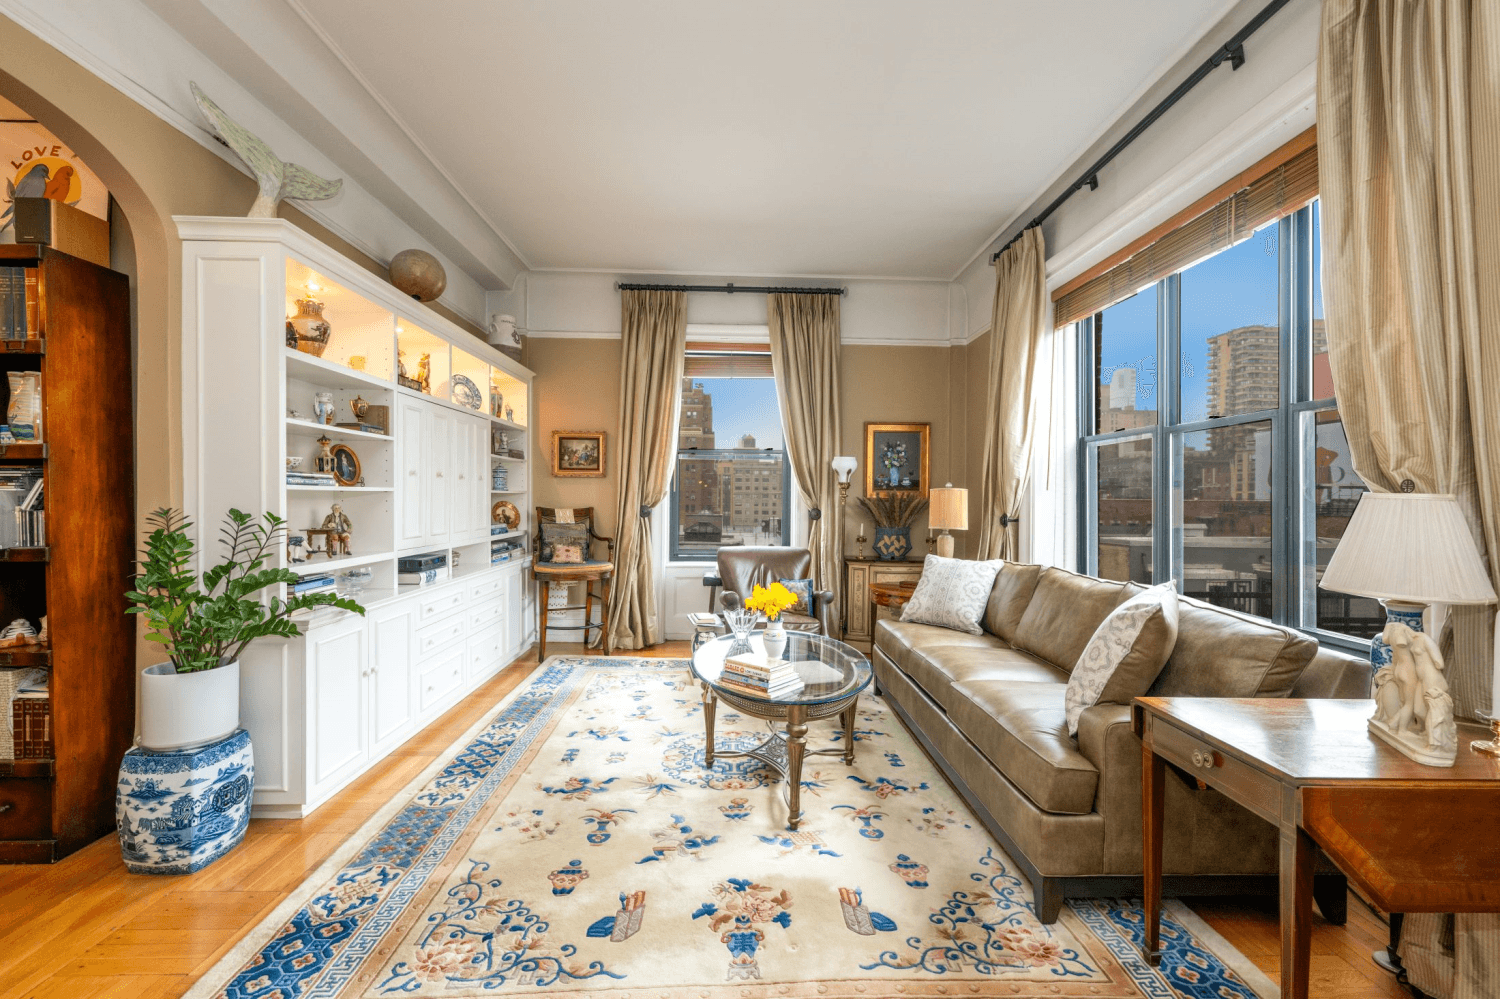 Welcome to this charming home in the ideal Upper West Side location of Riverside Drive and 93rd Street.